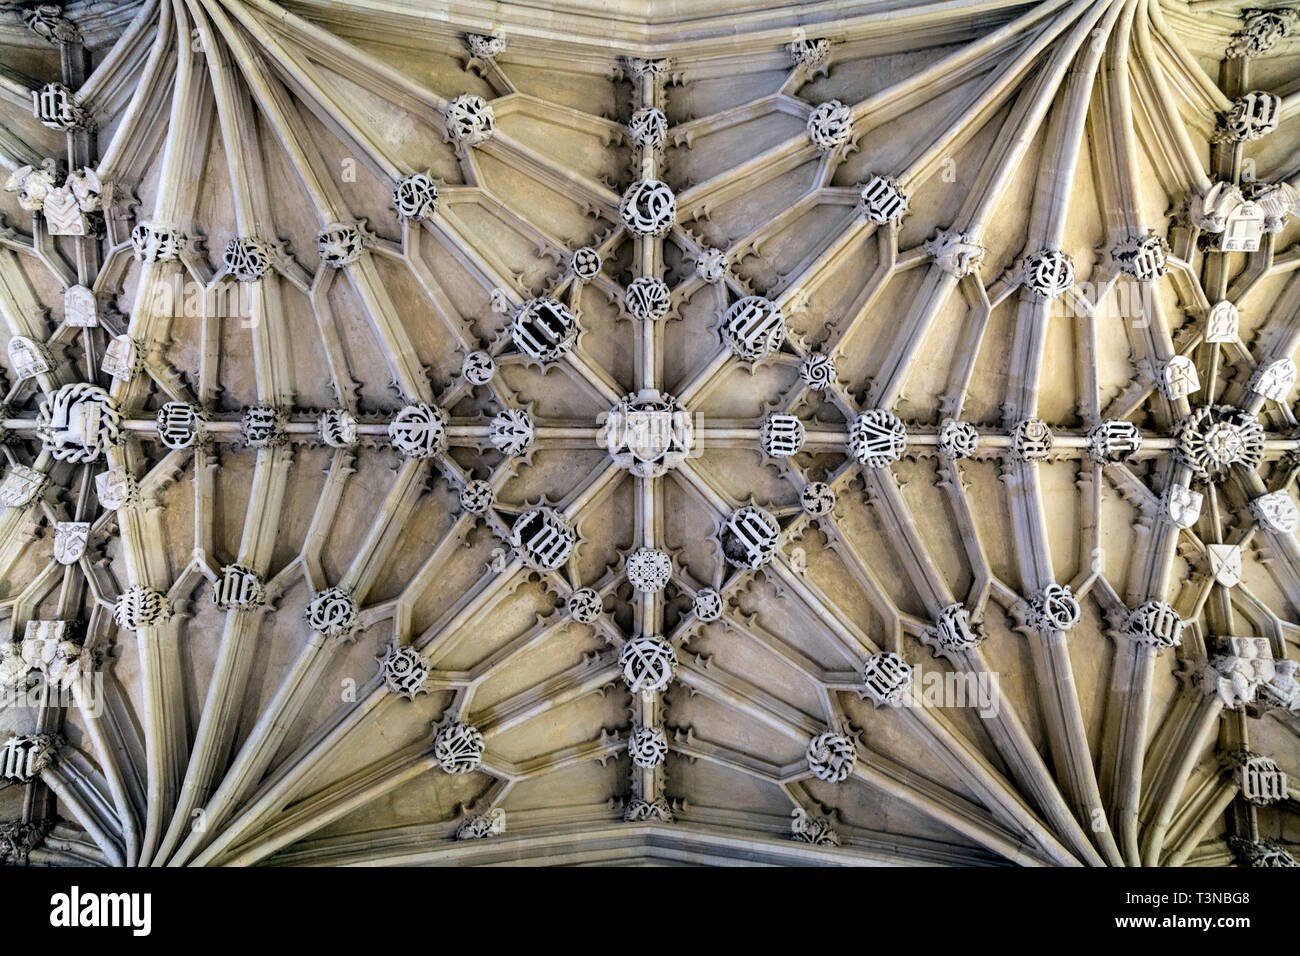 Ceiling of the Divinity School in Oxford, UK Stock Photo